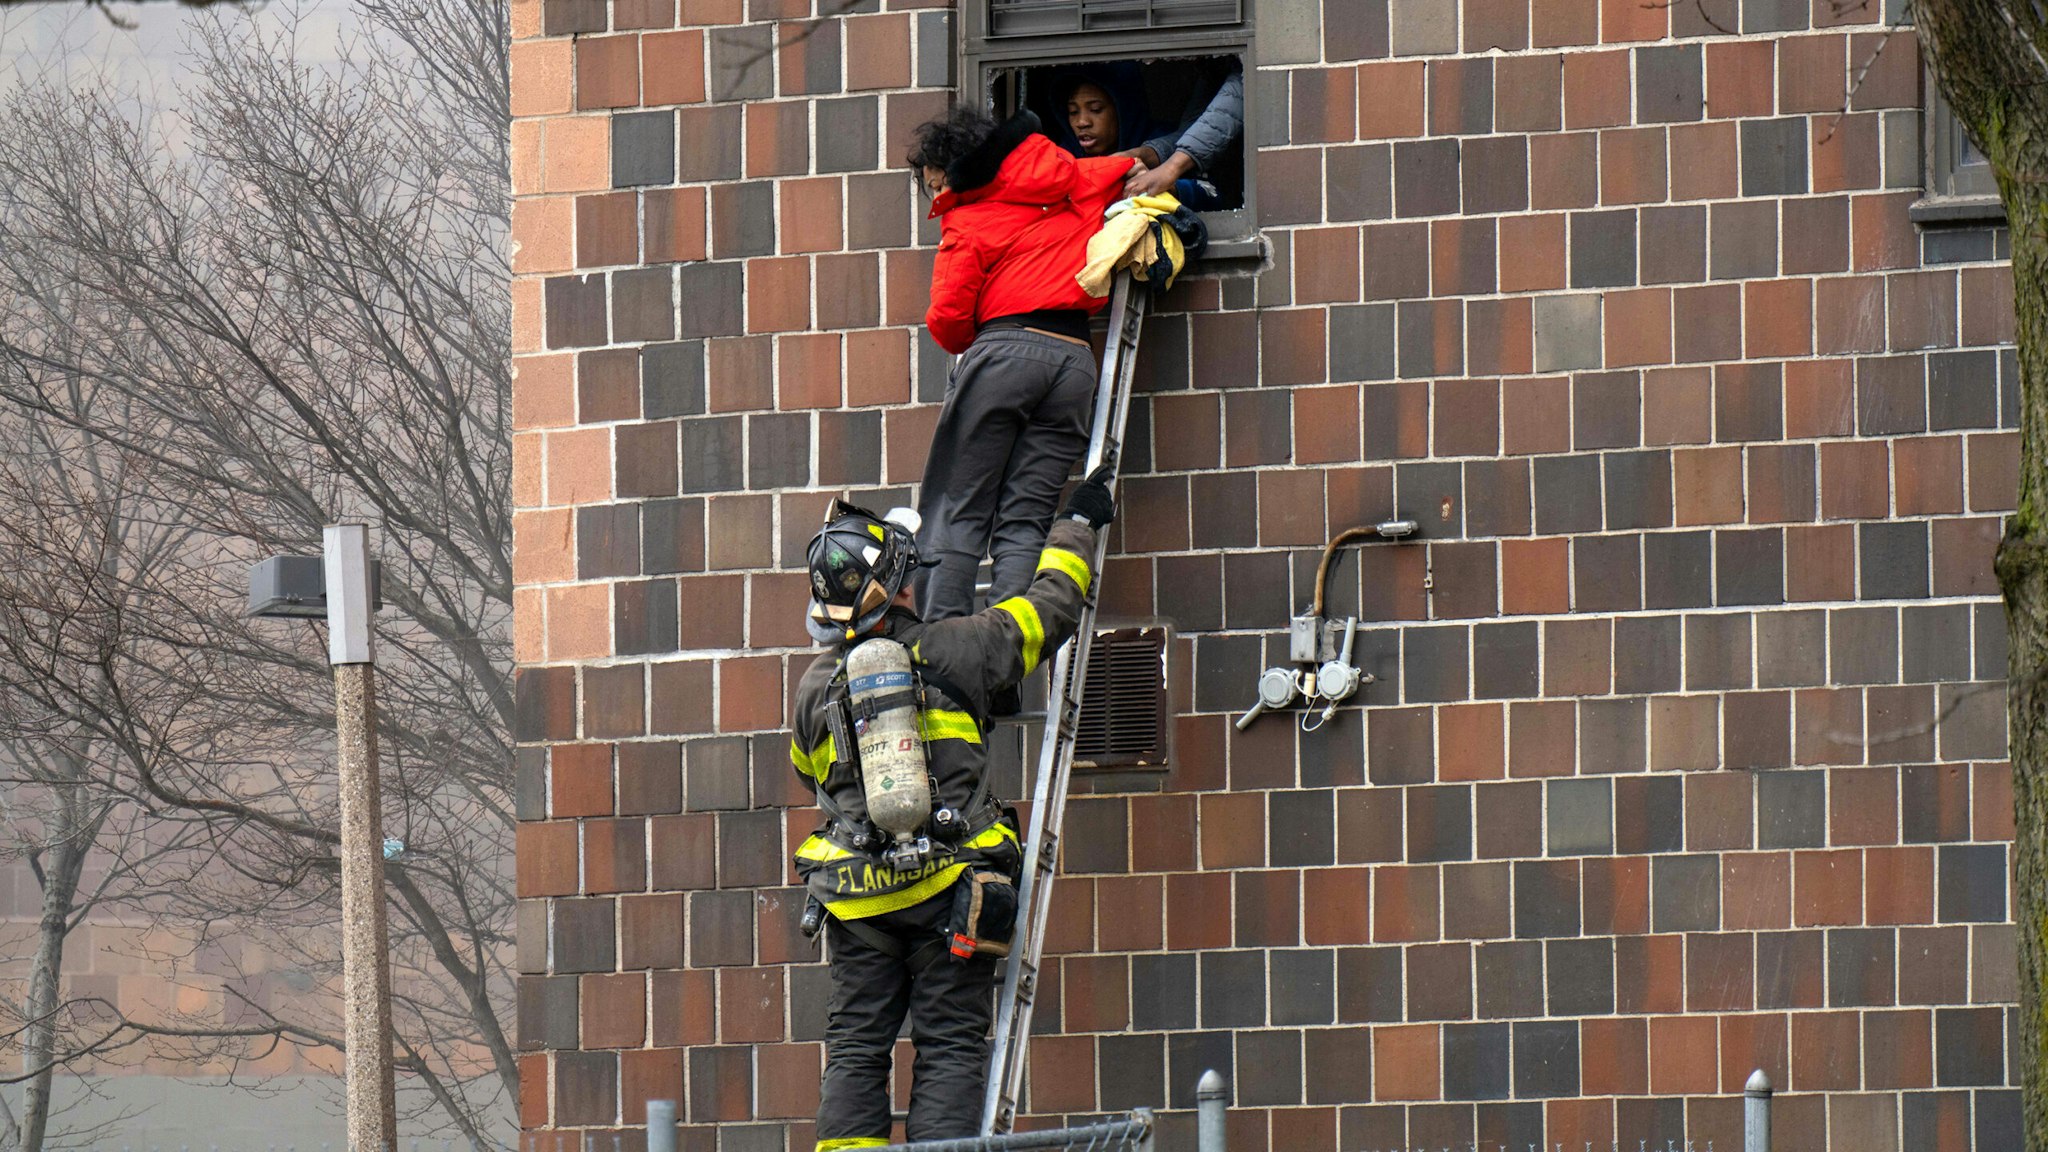 Firefighters hoisted a ladder to rescue people through their windows after a fire broke out inside a third-floor duplex apartment at 333 E. 181st St. in the Bronx Sunday.